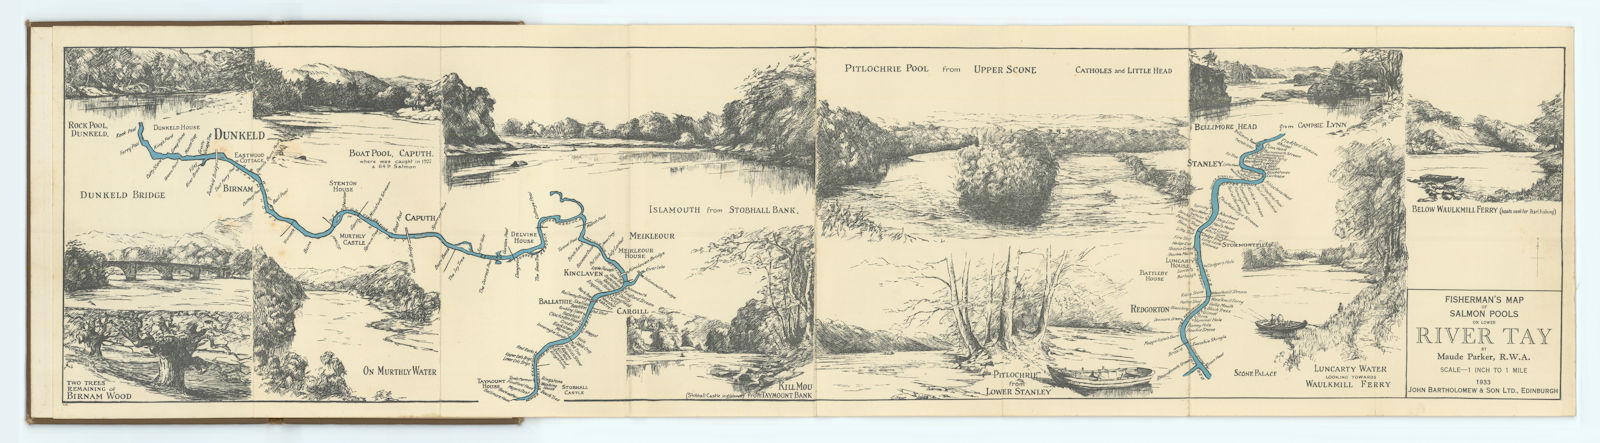 Fisherman's Map of Salmon Pools on lower River Tay by Maude Parker 1933